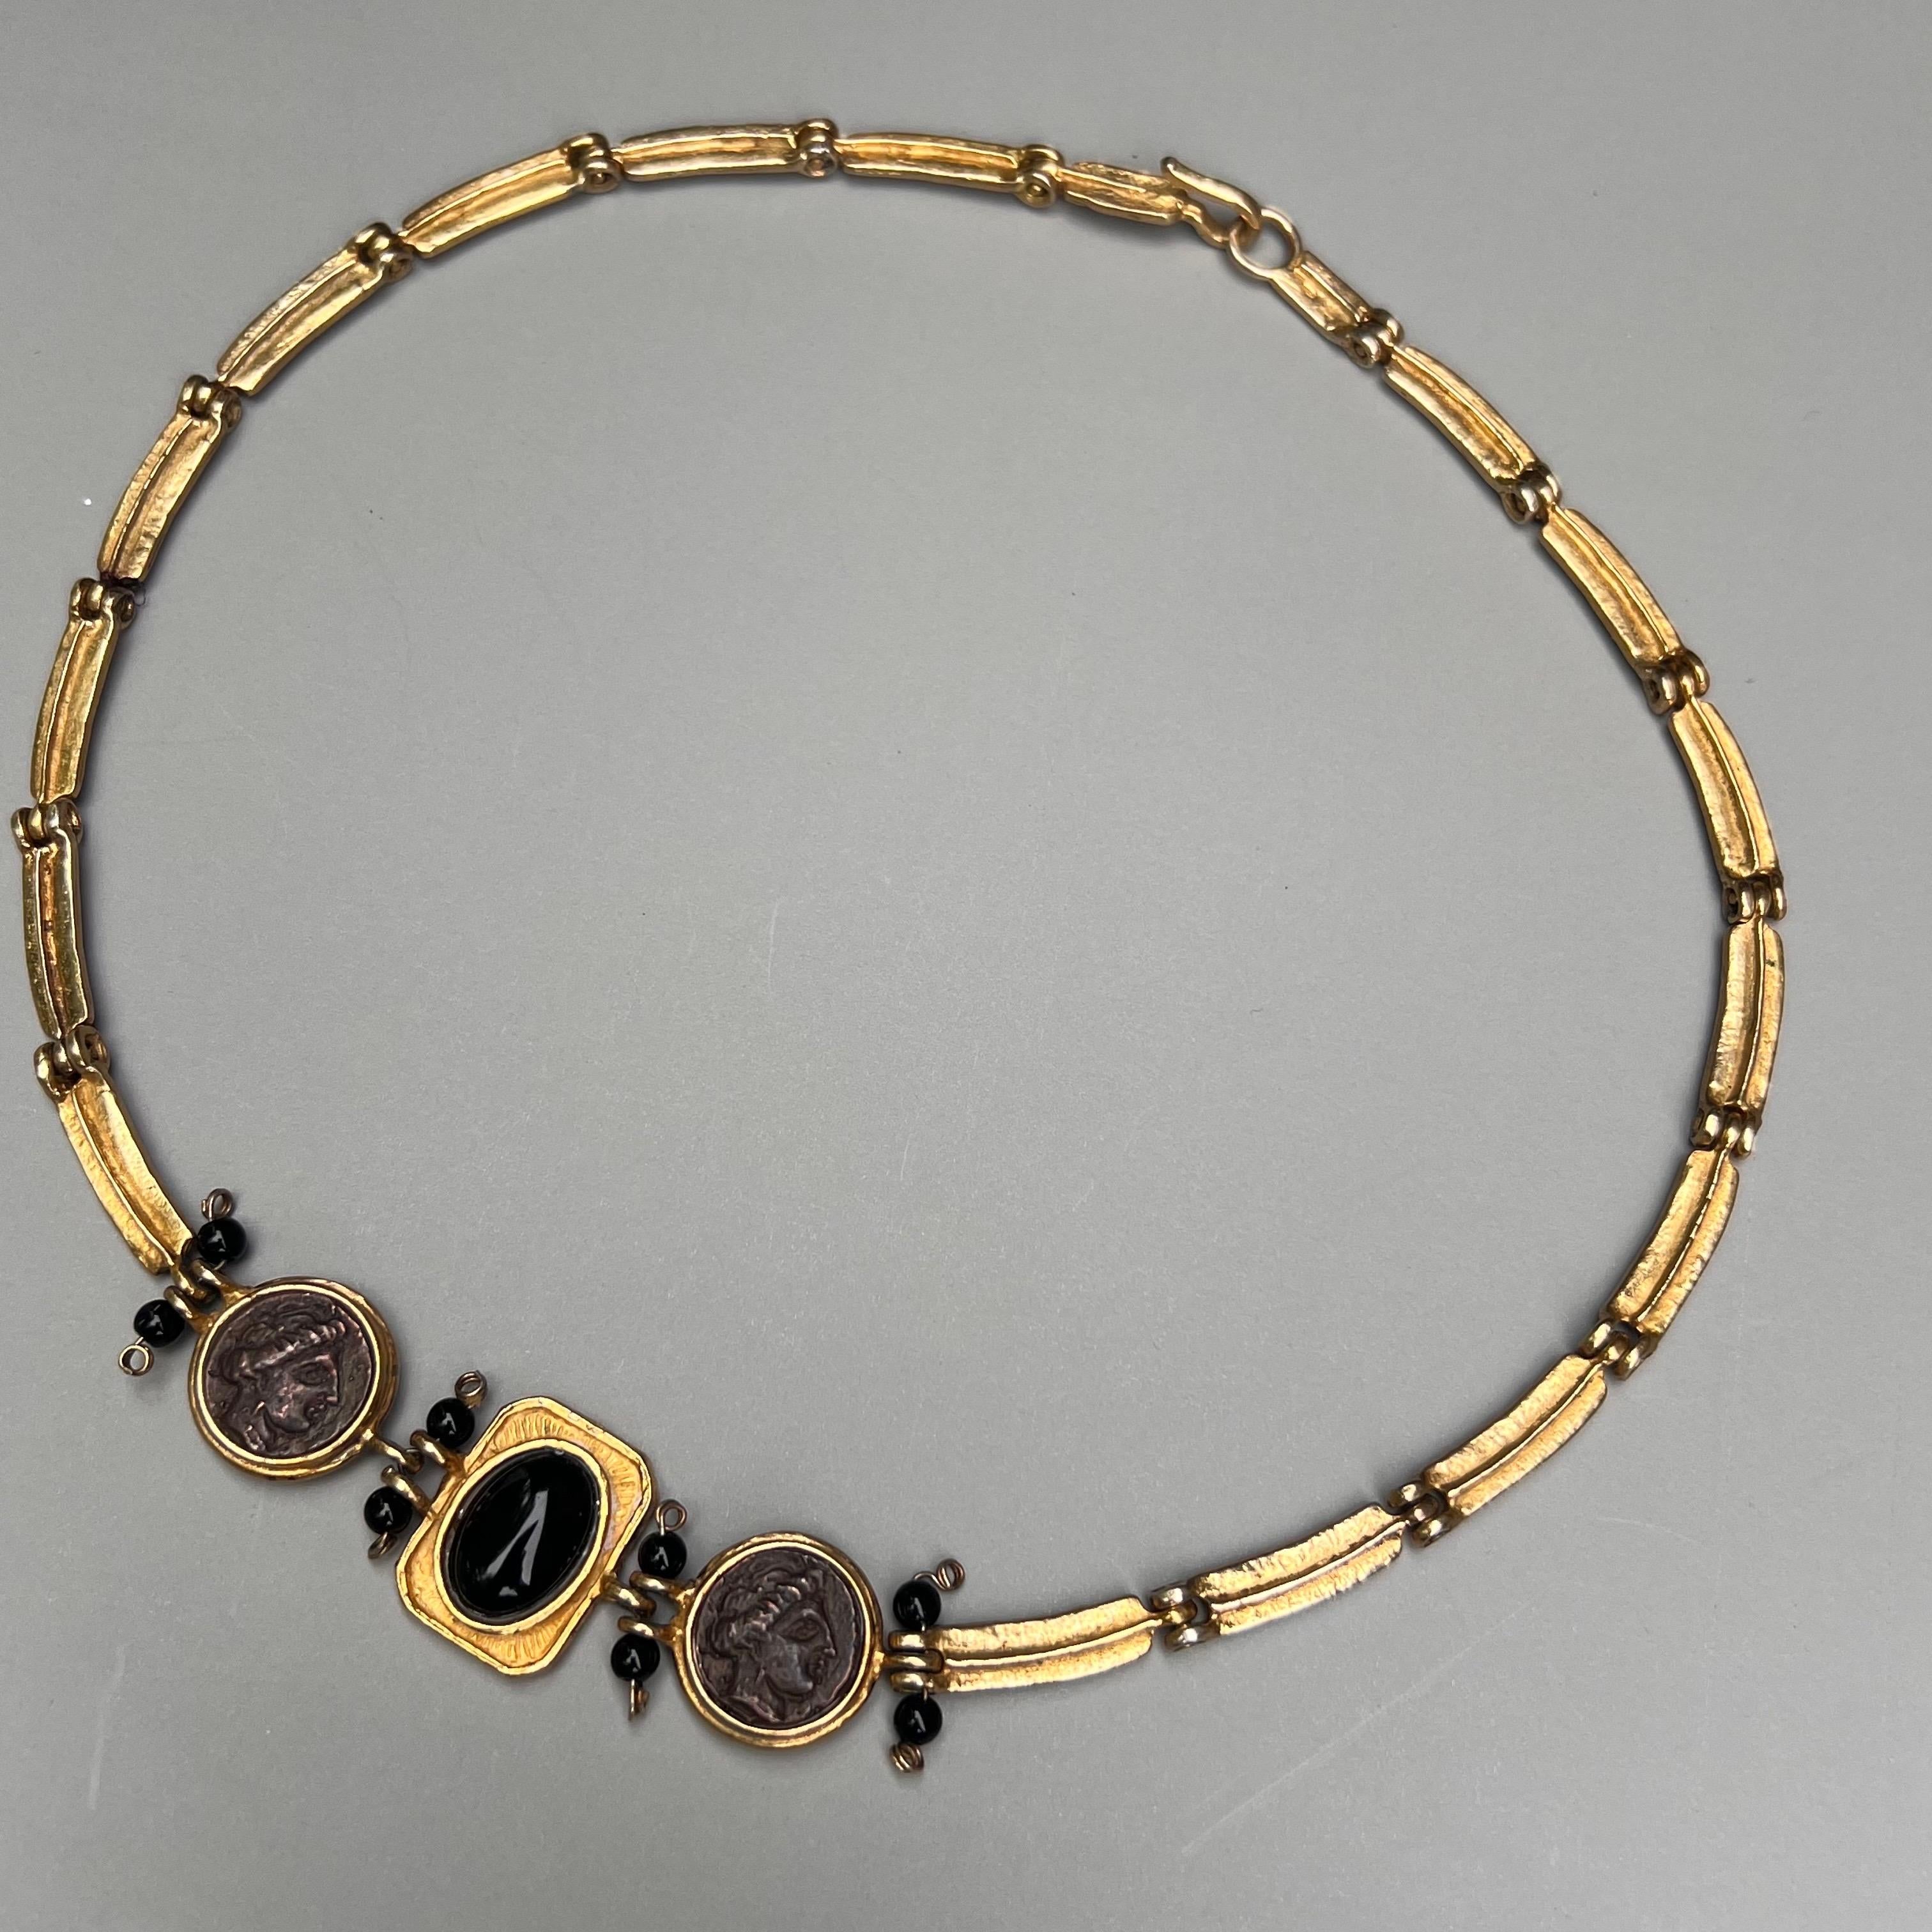 This necklace boasts an unsigned designer allure, hand crafted with gold gilt sterling silver, evoking a sense of vintage glamour and mystery.
Adorned with faux Roman coins, the necklace captures the essence of ancient mythology and adds a touch of